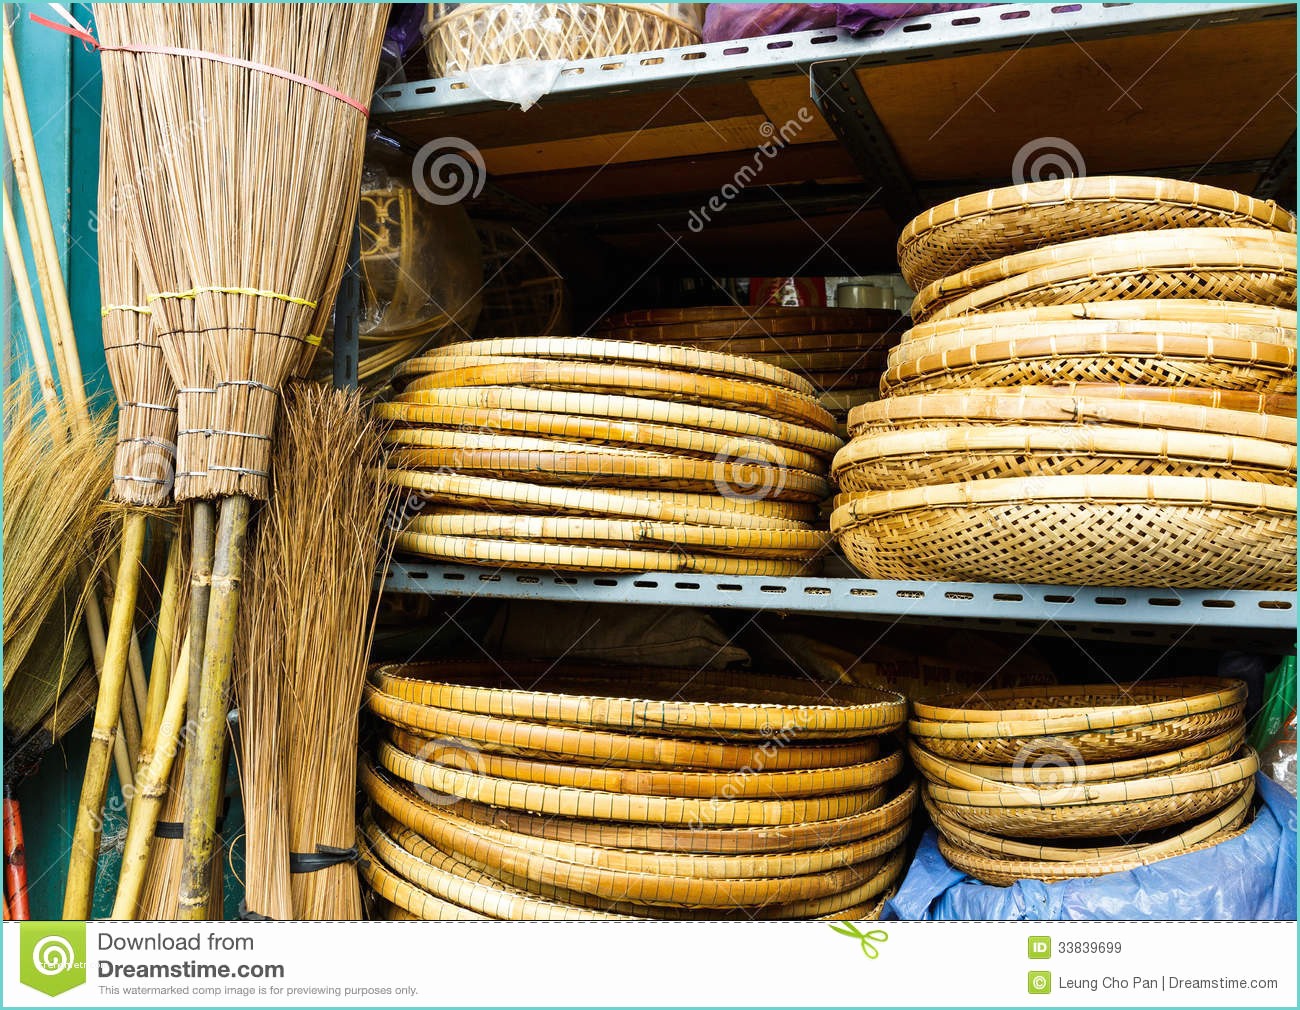 Handmade Wood Products that Sell Wicker Handmade Wooden Basket Royalty Free Stock